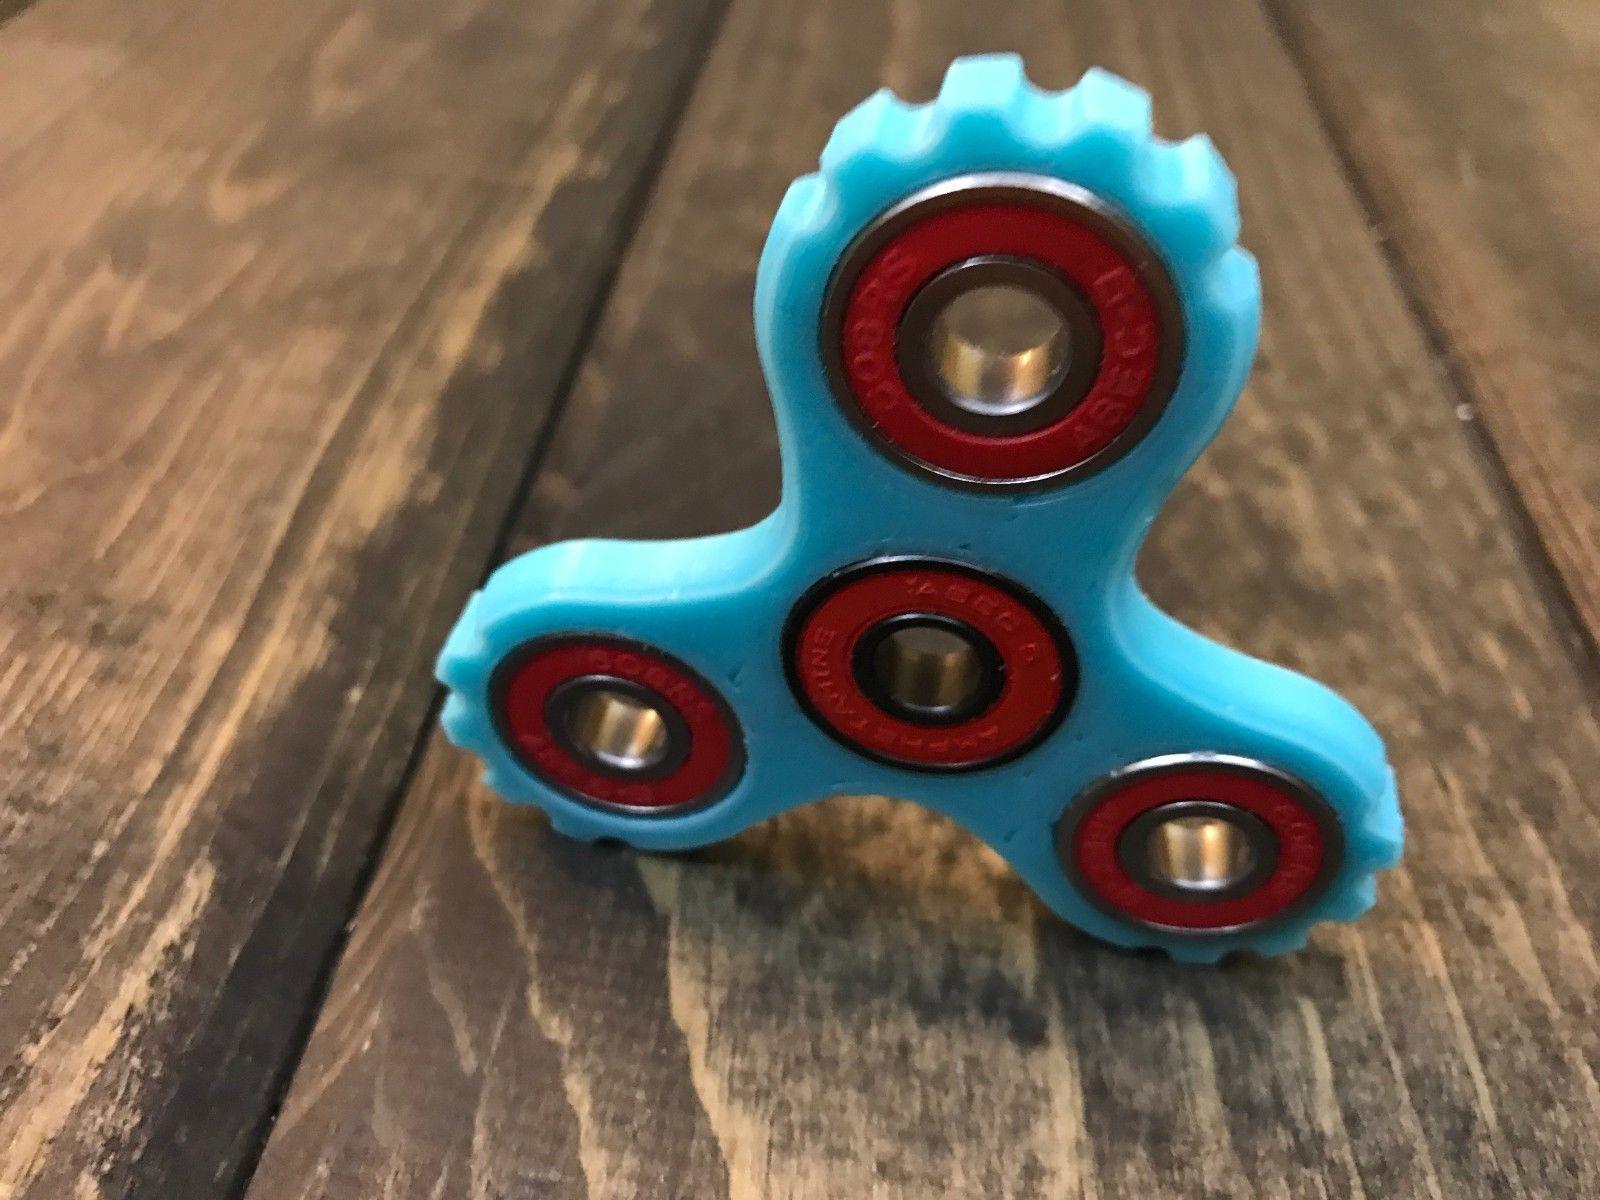 EDC Toy / Fidget Spinner / Aqua Blue With Red Color